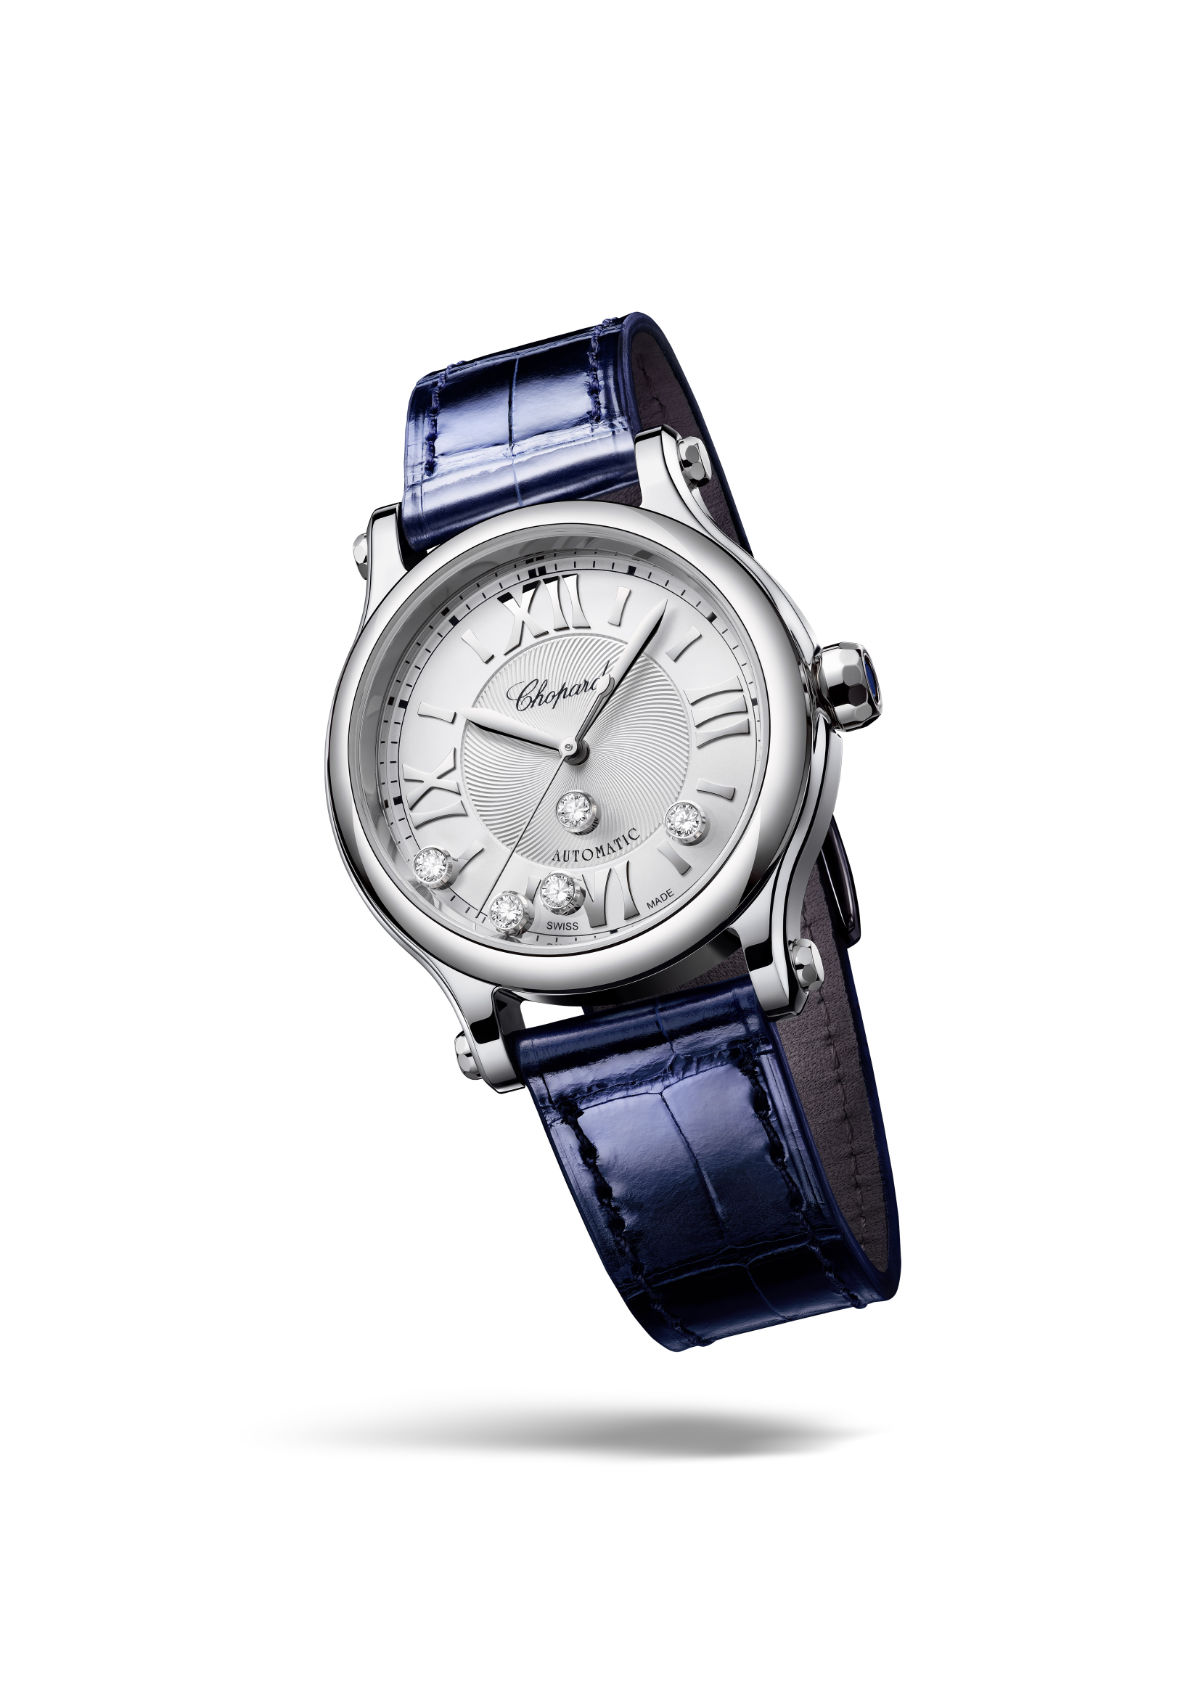 Happy Sport – 33 mm: Golden Ratio For Chopard’s Iconic Watch